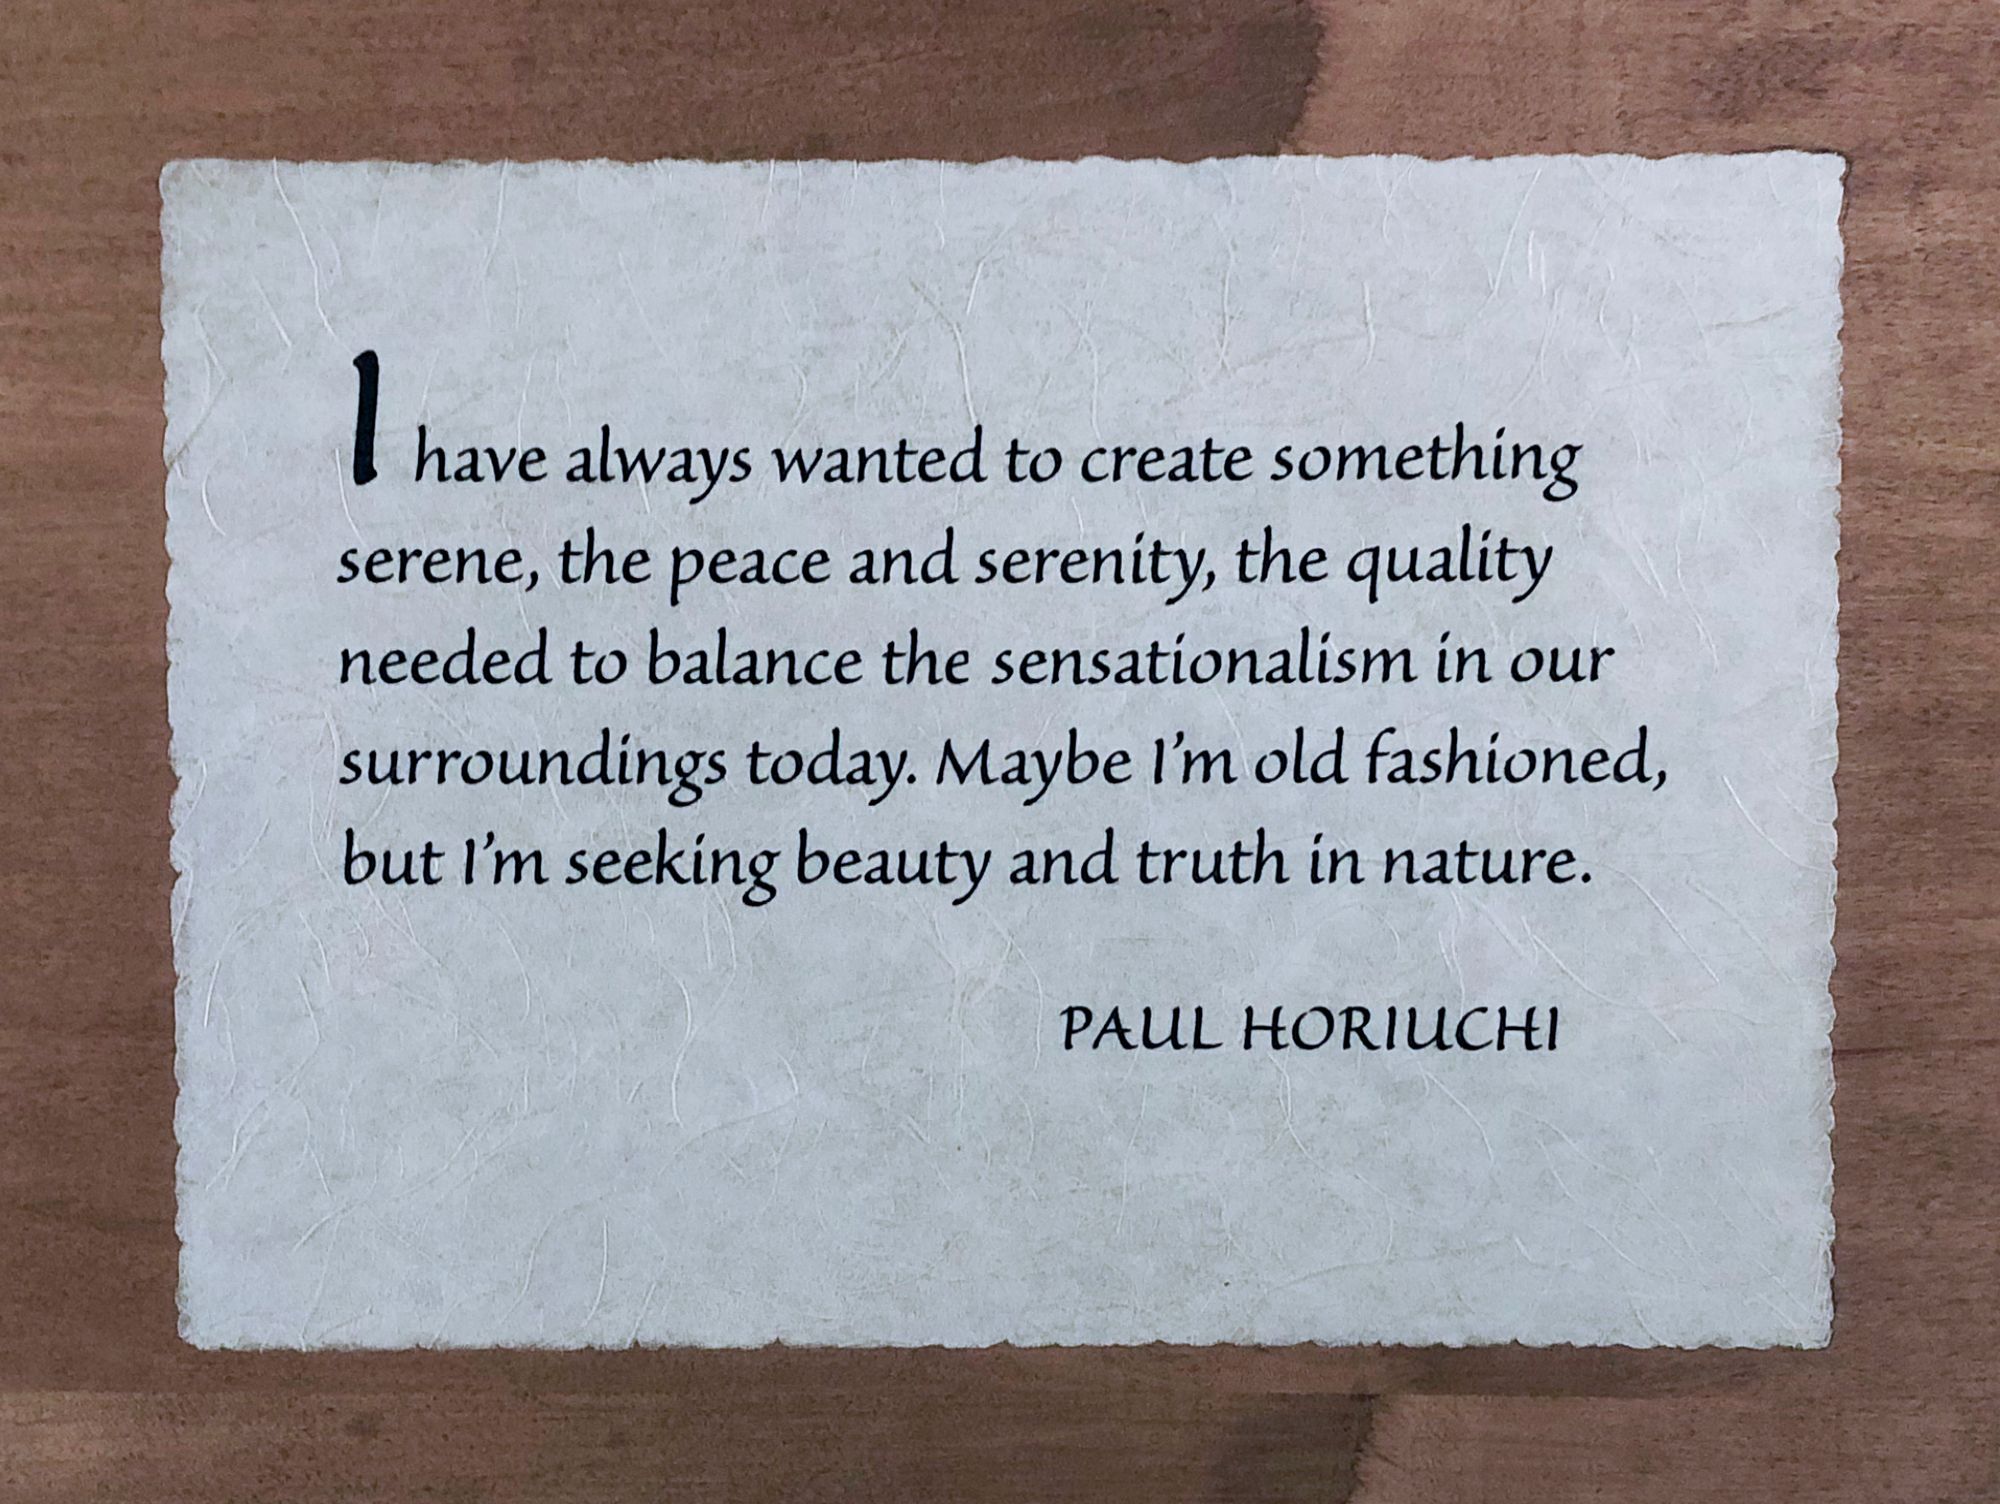 Photo of wooden plaque with Paul Horiuchi quote: “I have always wanted to create something serene, the peace and serenity, the quality needed to balance the sensationalism in our surroundings today. Maybe I’m old fashioned, but I’m seeking beauty and truth in nature.” 